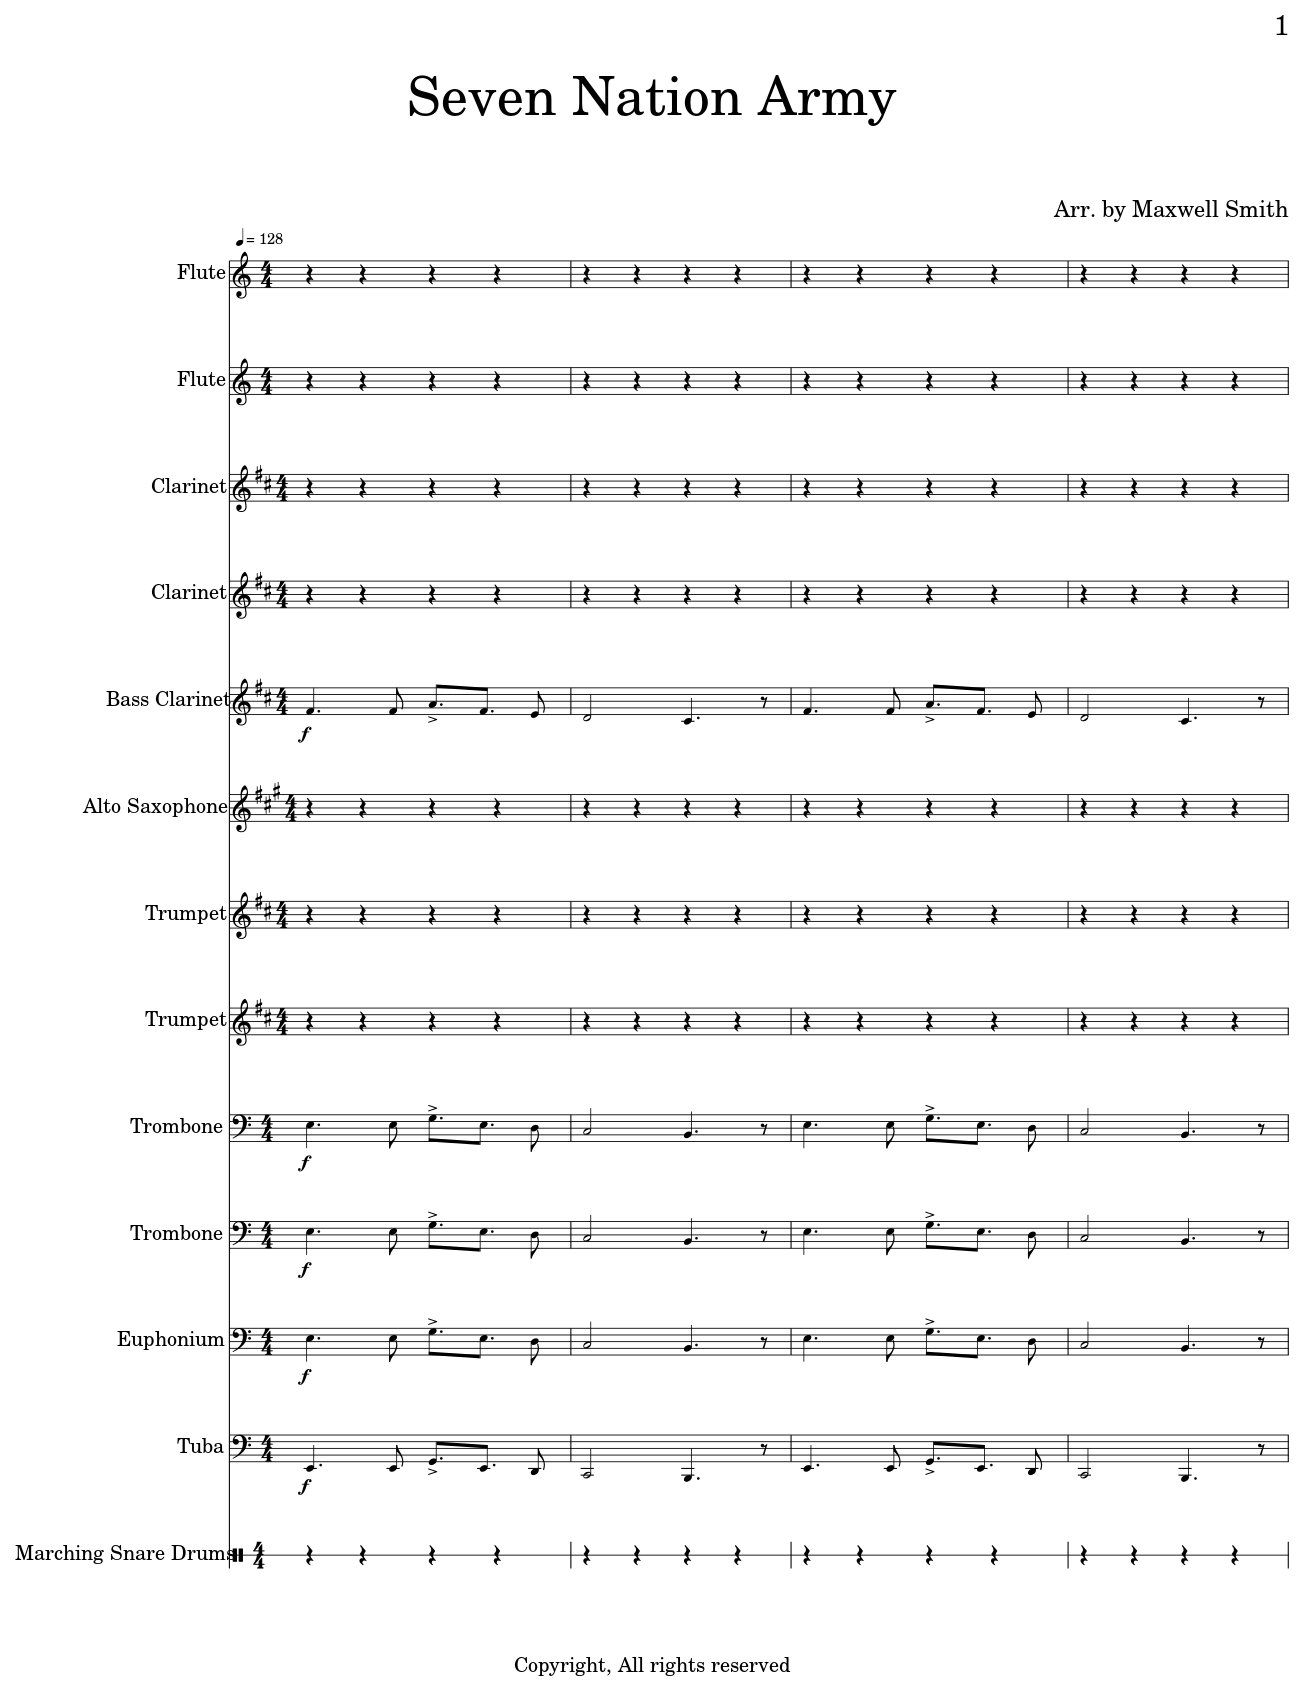 Seven Nation Army Sheet Music For Flute Clarinet Bass Clarinet Alto Saxophone Trumpet Trombone Euphonium Tuba Marching Bass Drums